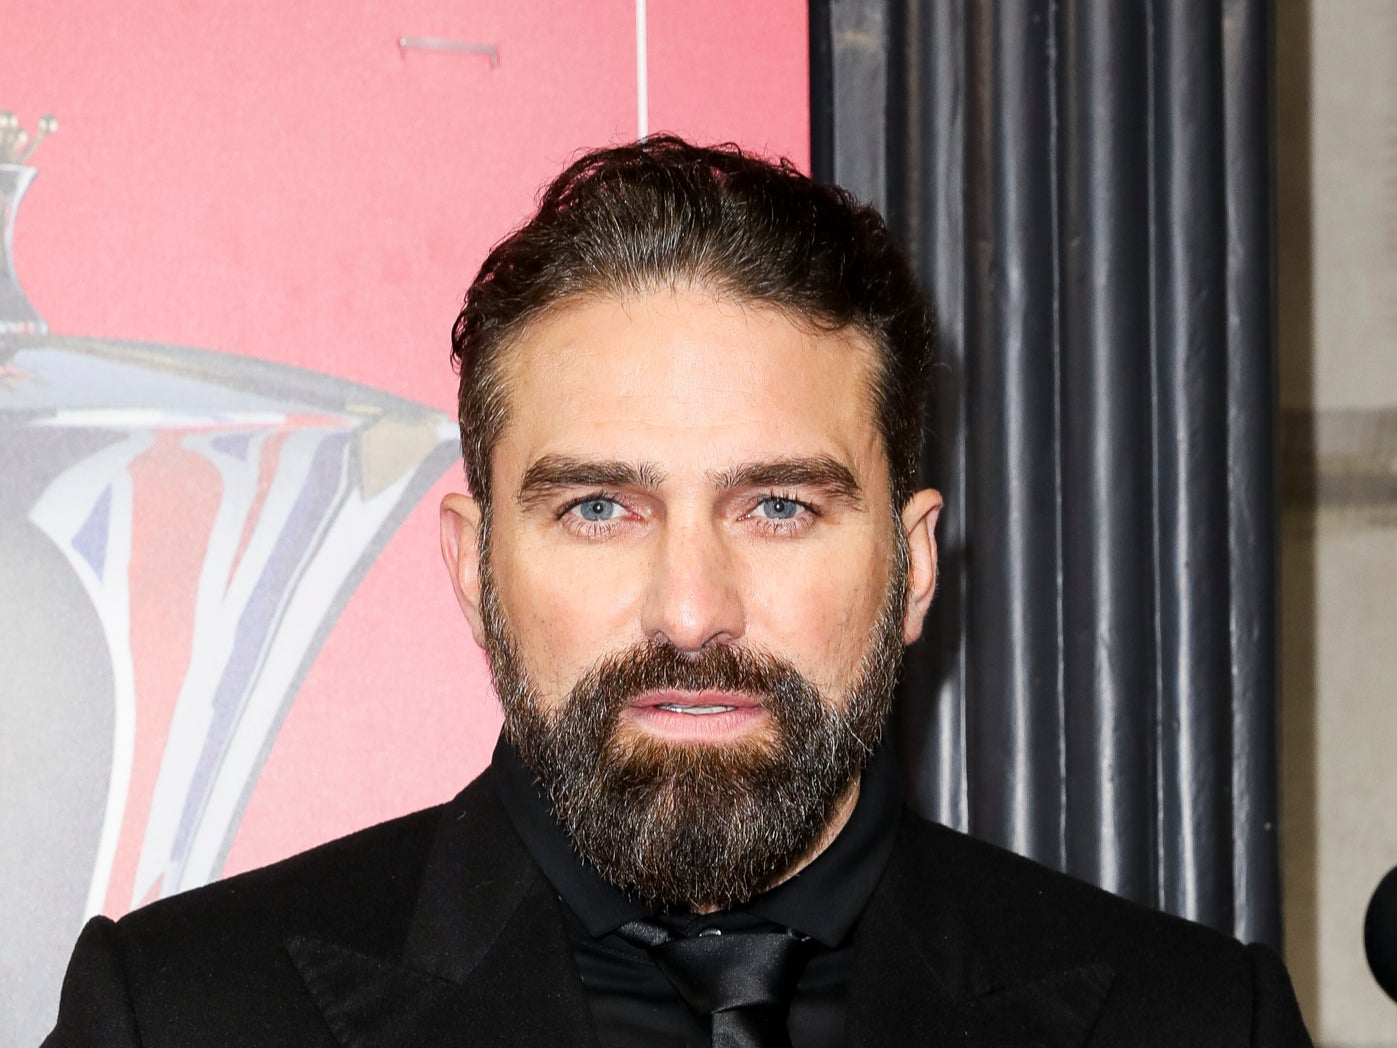 Ant Middleton has been a part of ‘SAS: Who Dares Wins’ since 2015